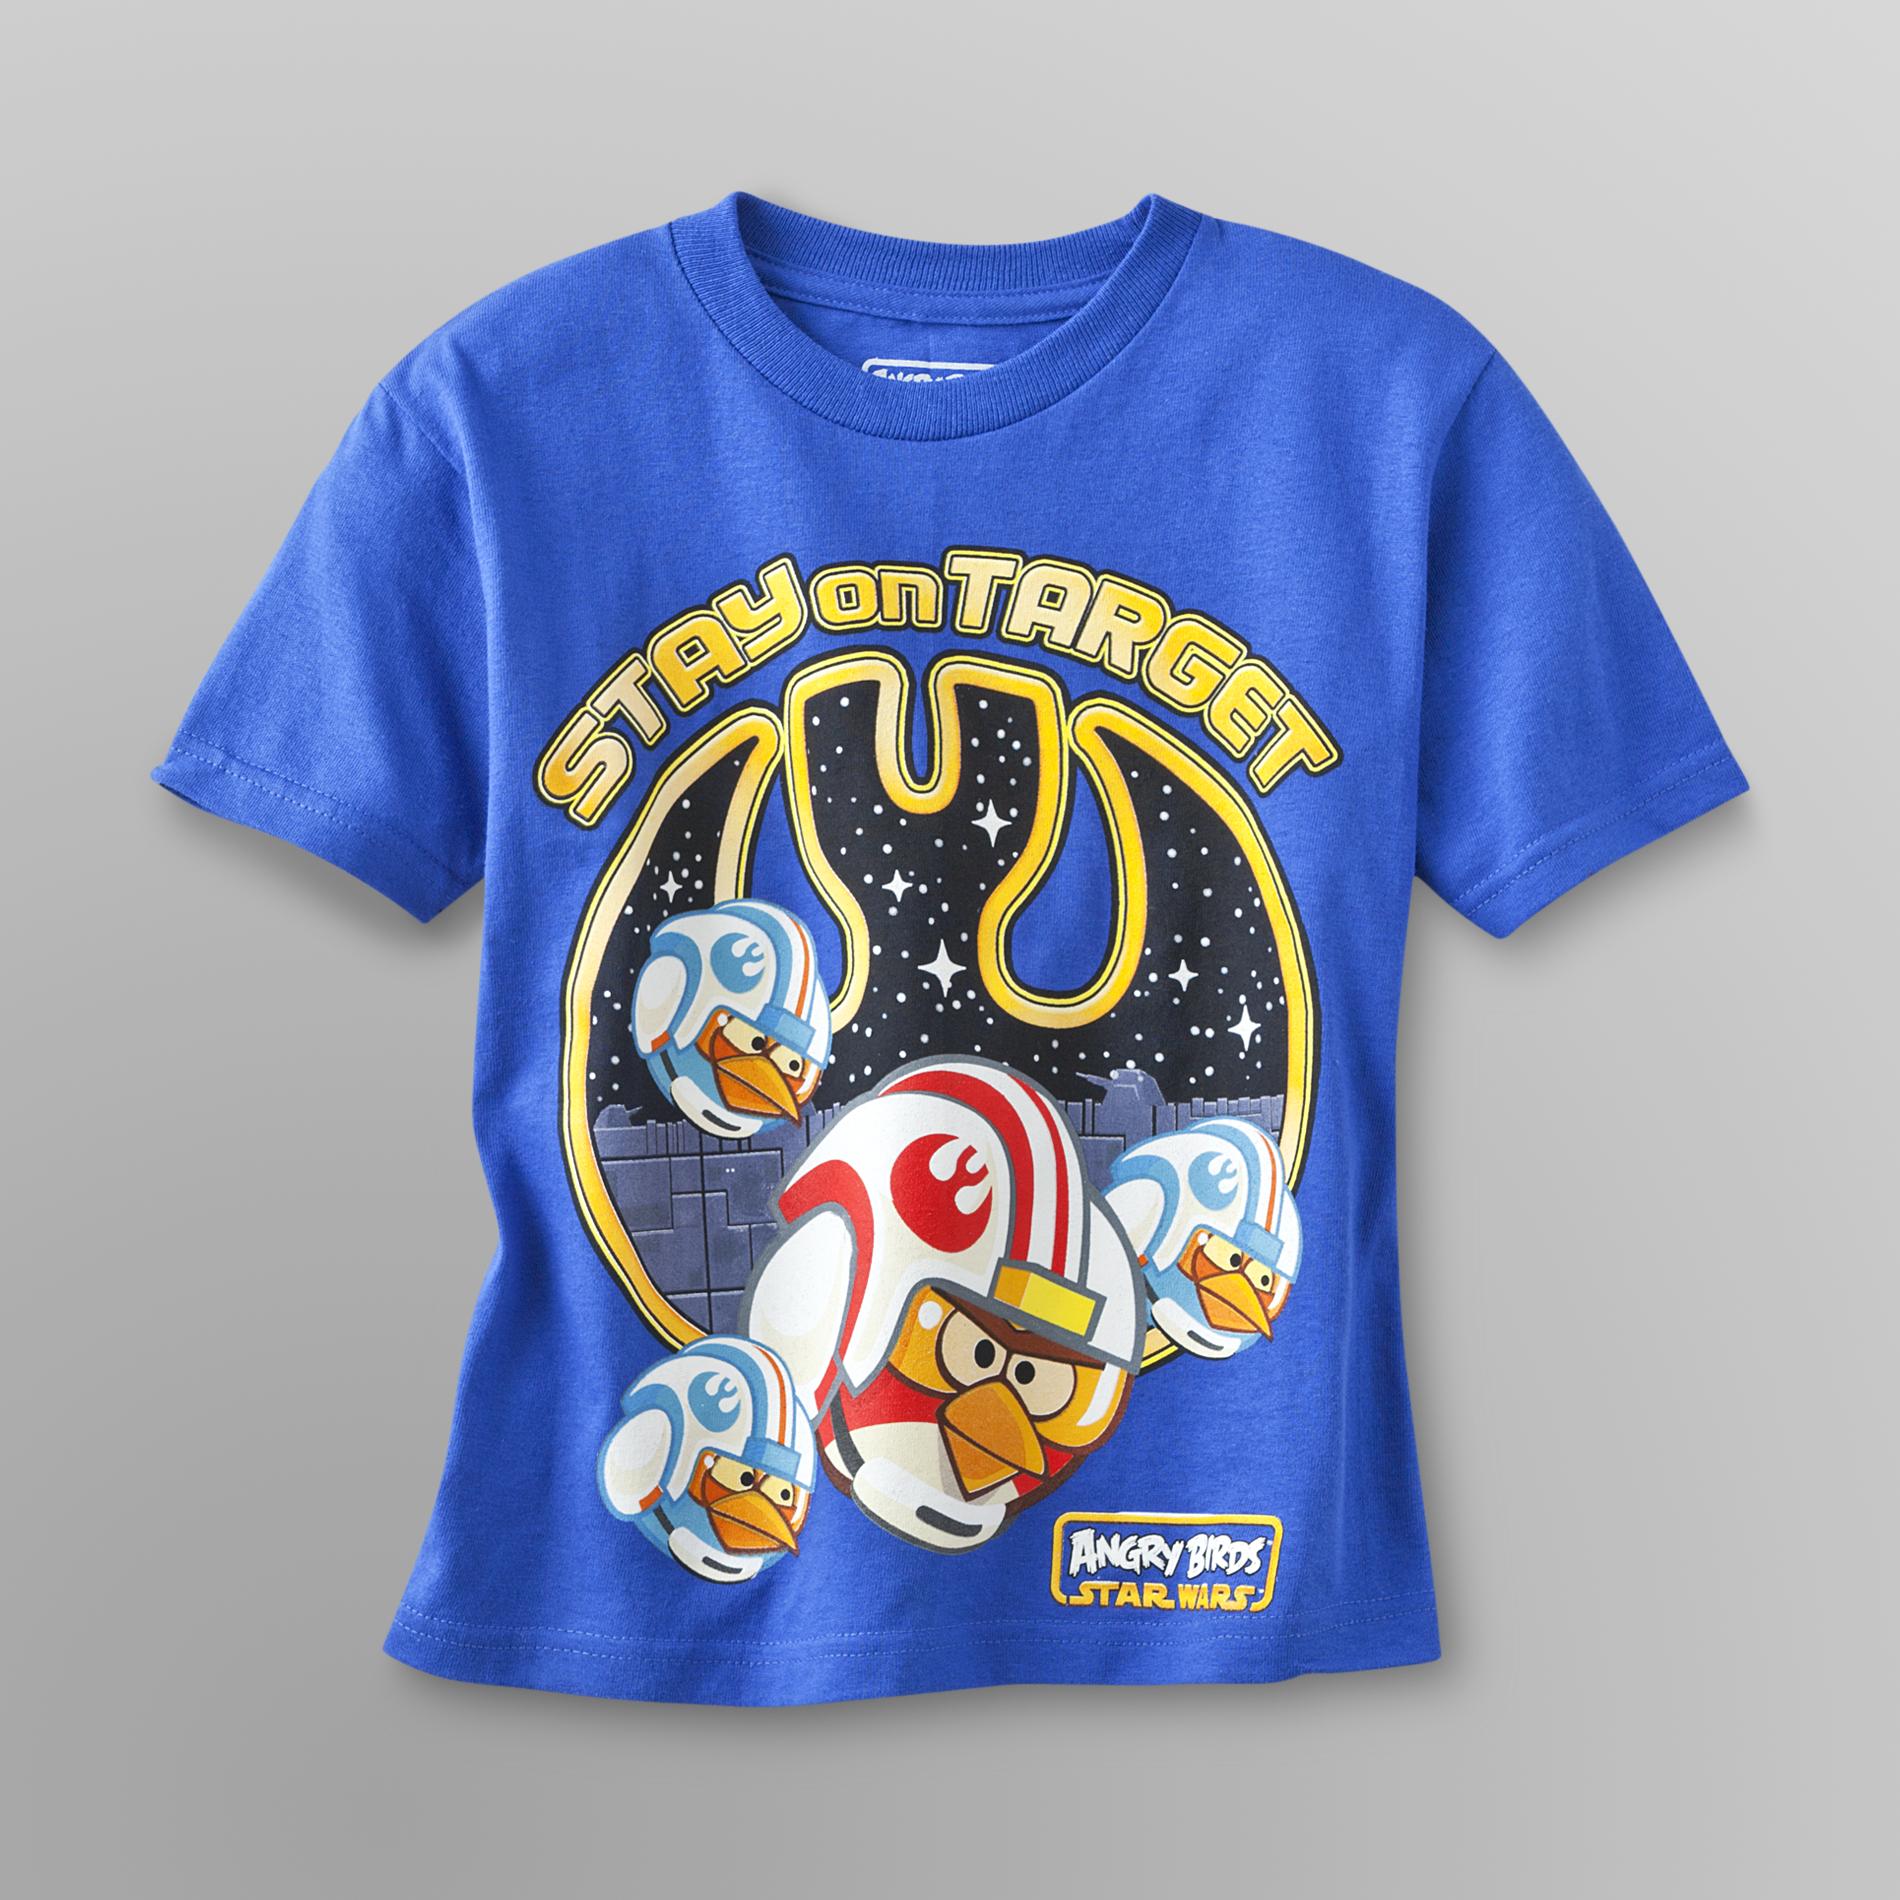 Angry Birds Star Wars Boy's Graphic T-Shirt